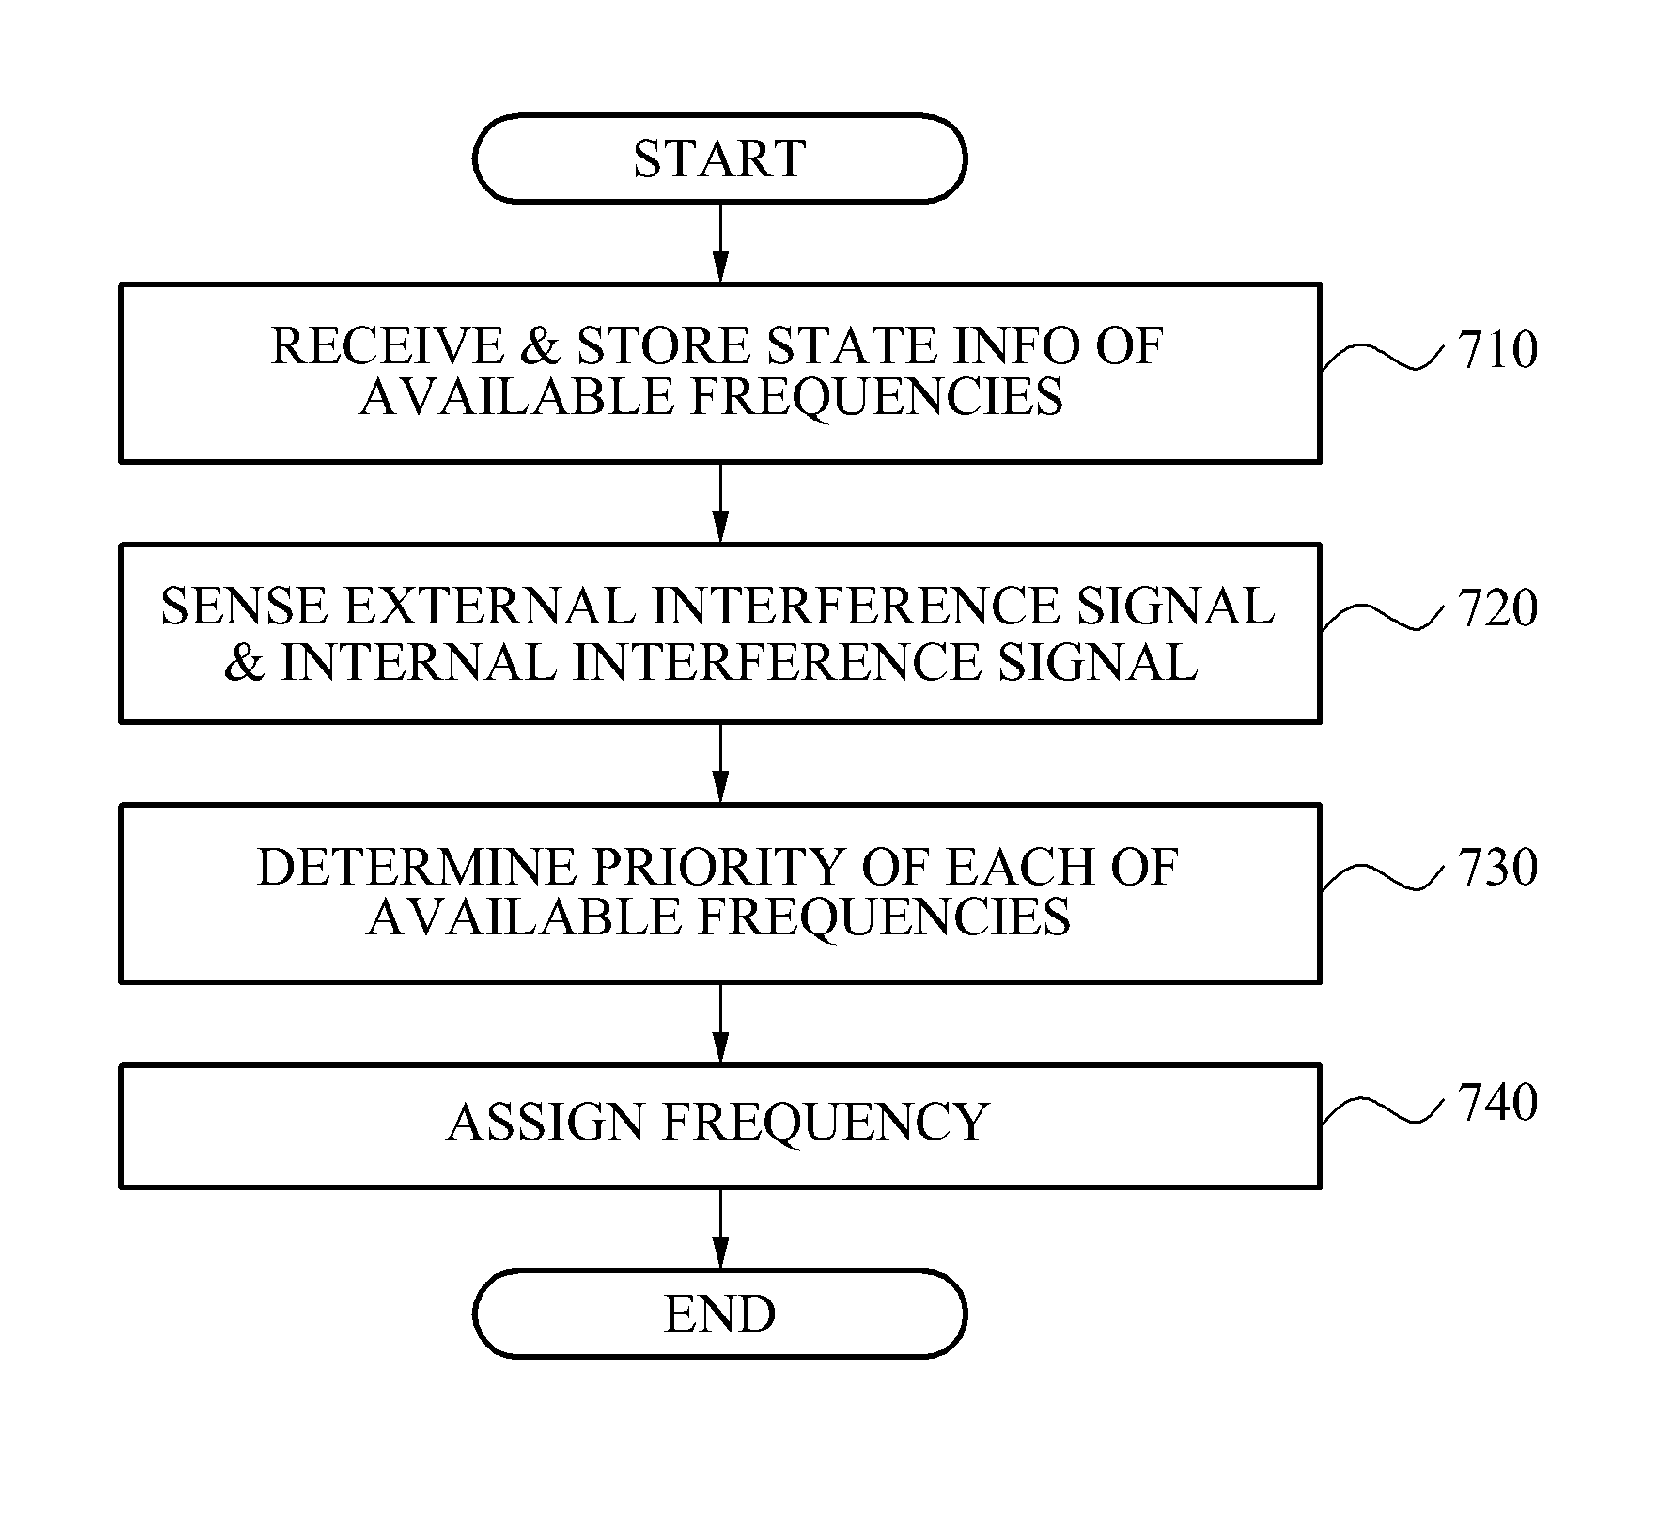 Wireless communication system between medical devices using cognitive technology